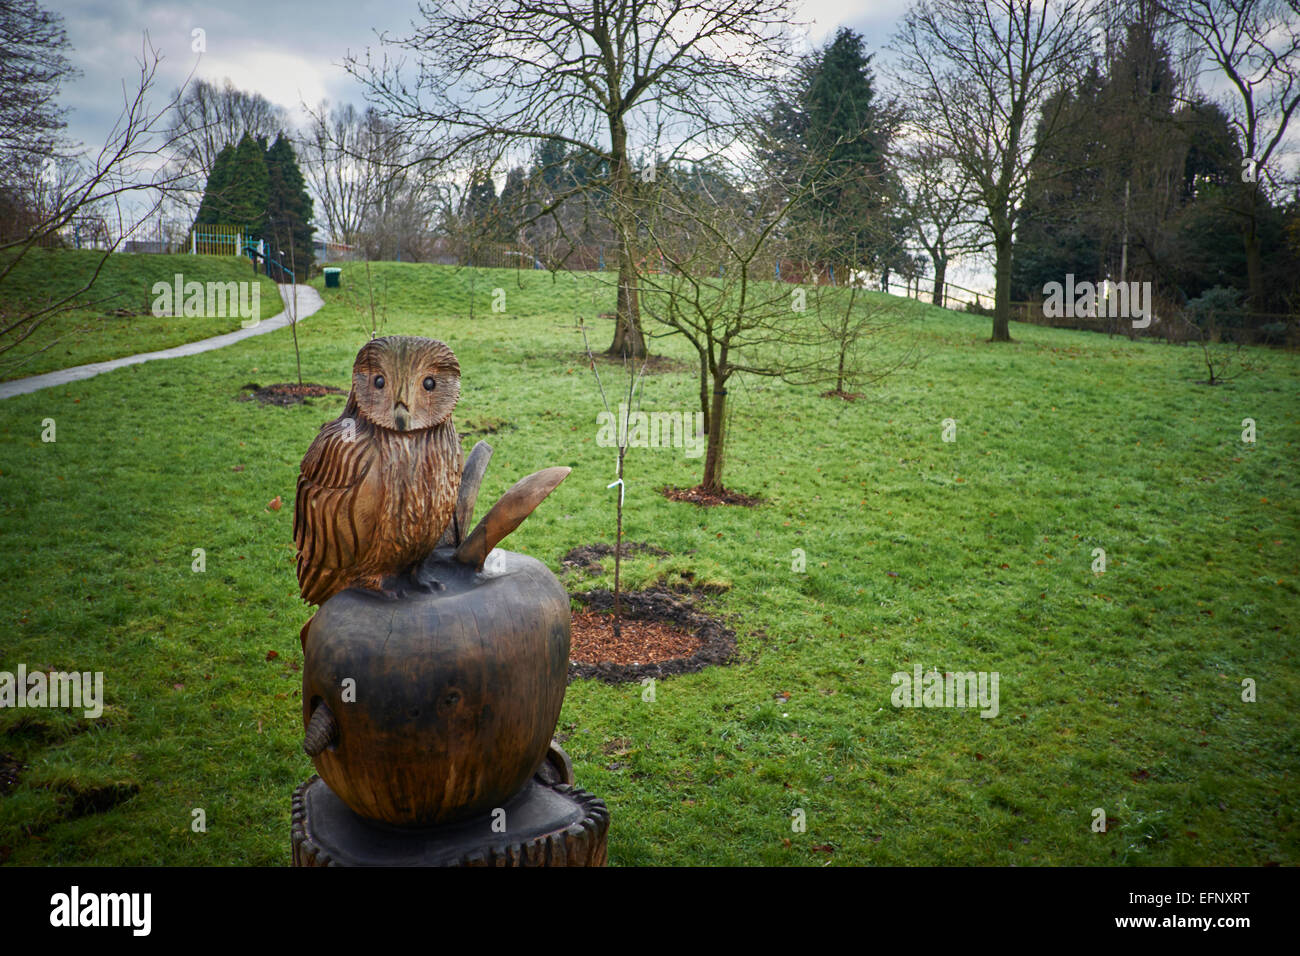 Debdale Park Gorton Manchester UK tree carving in the community orchard Stock Photo